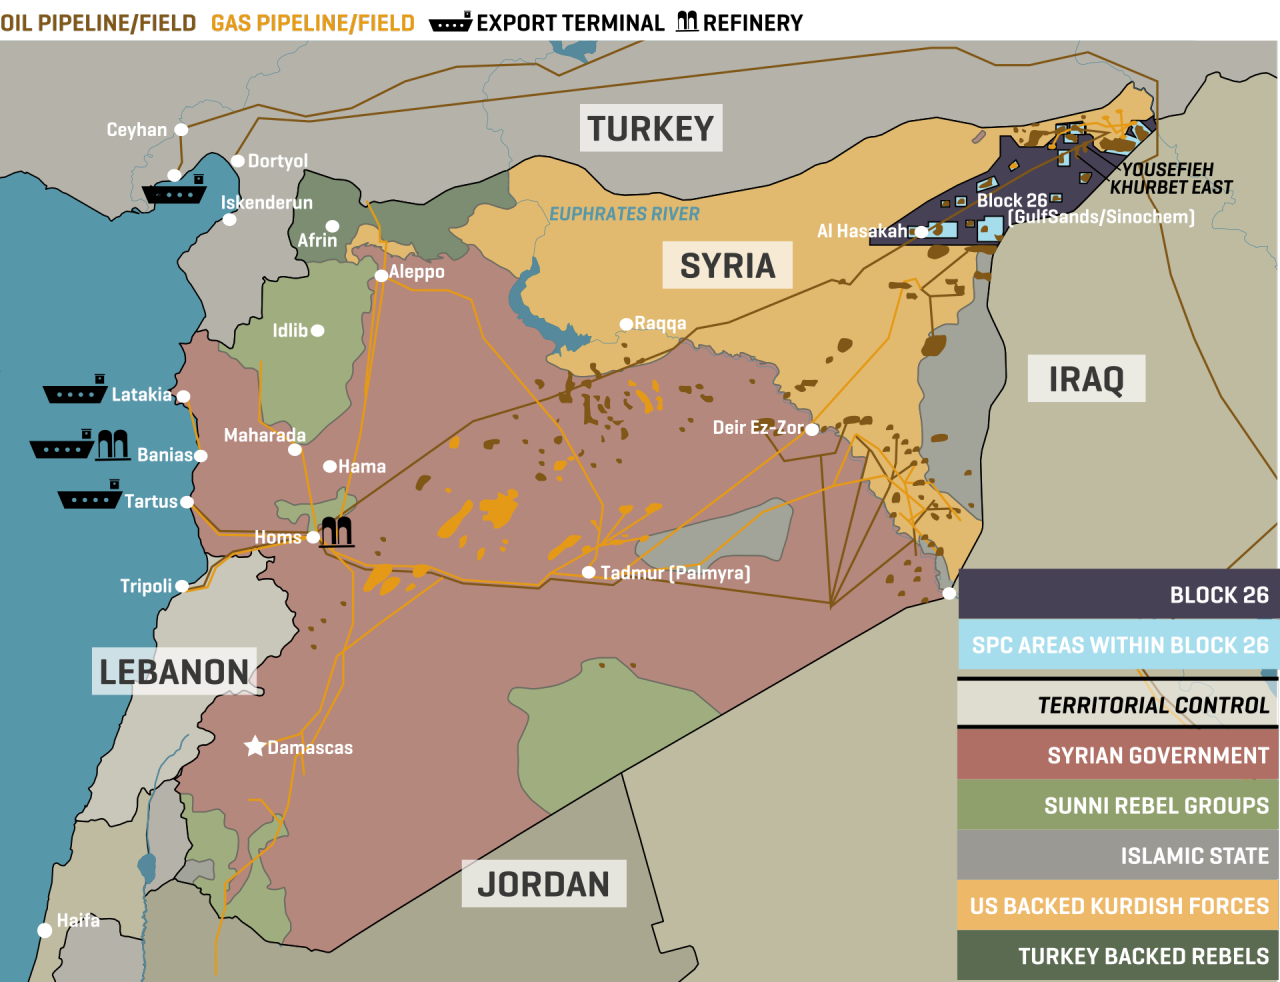 Syria’s energy infrastructure, Political divisions as of May 18